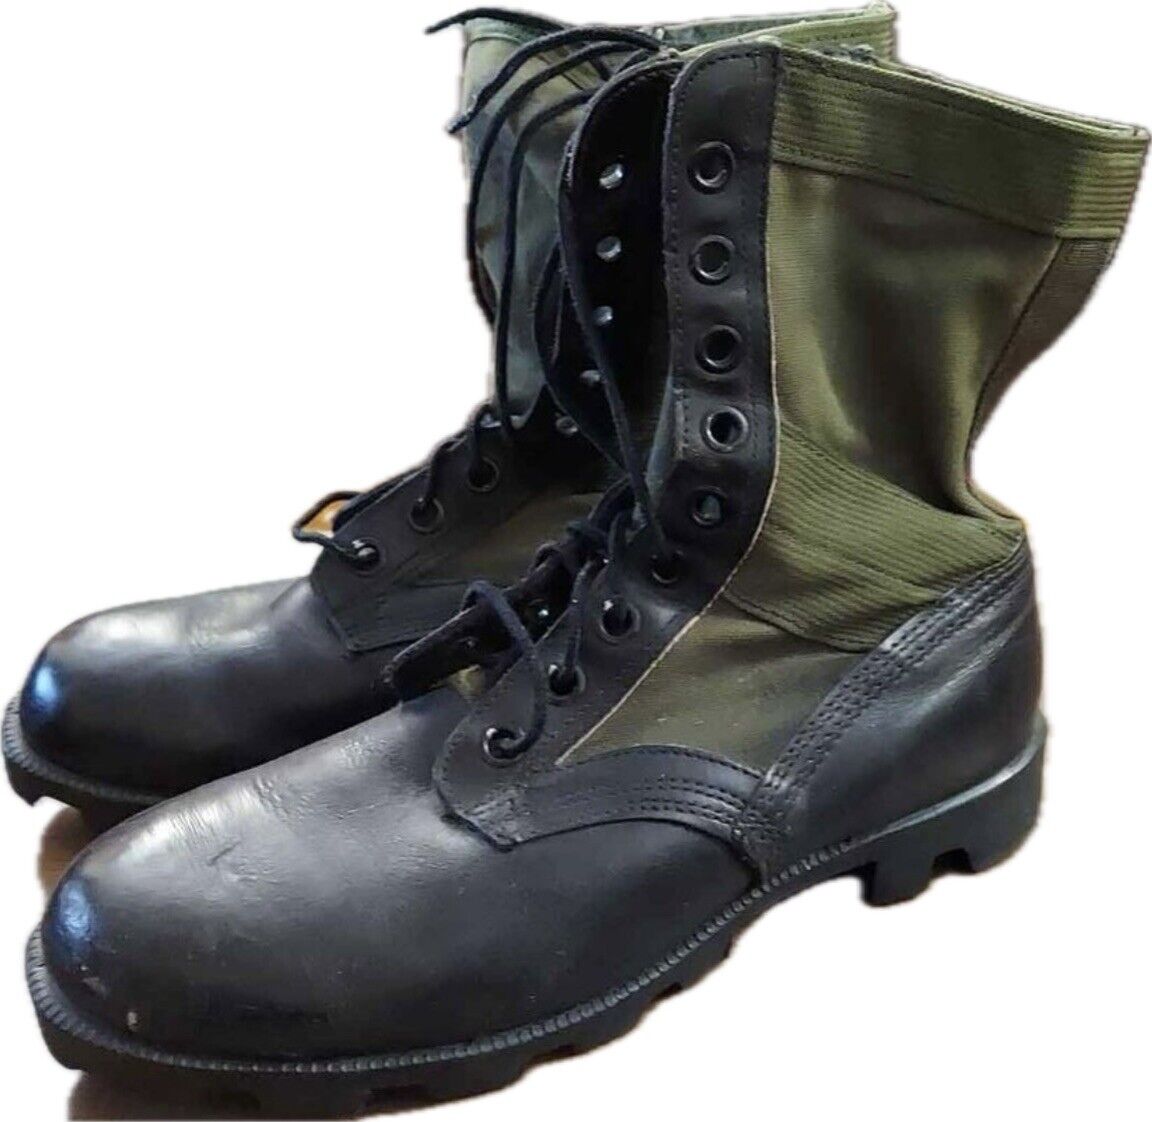 1988 Jungle Boots 8W Used